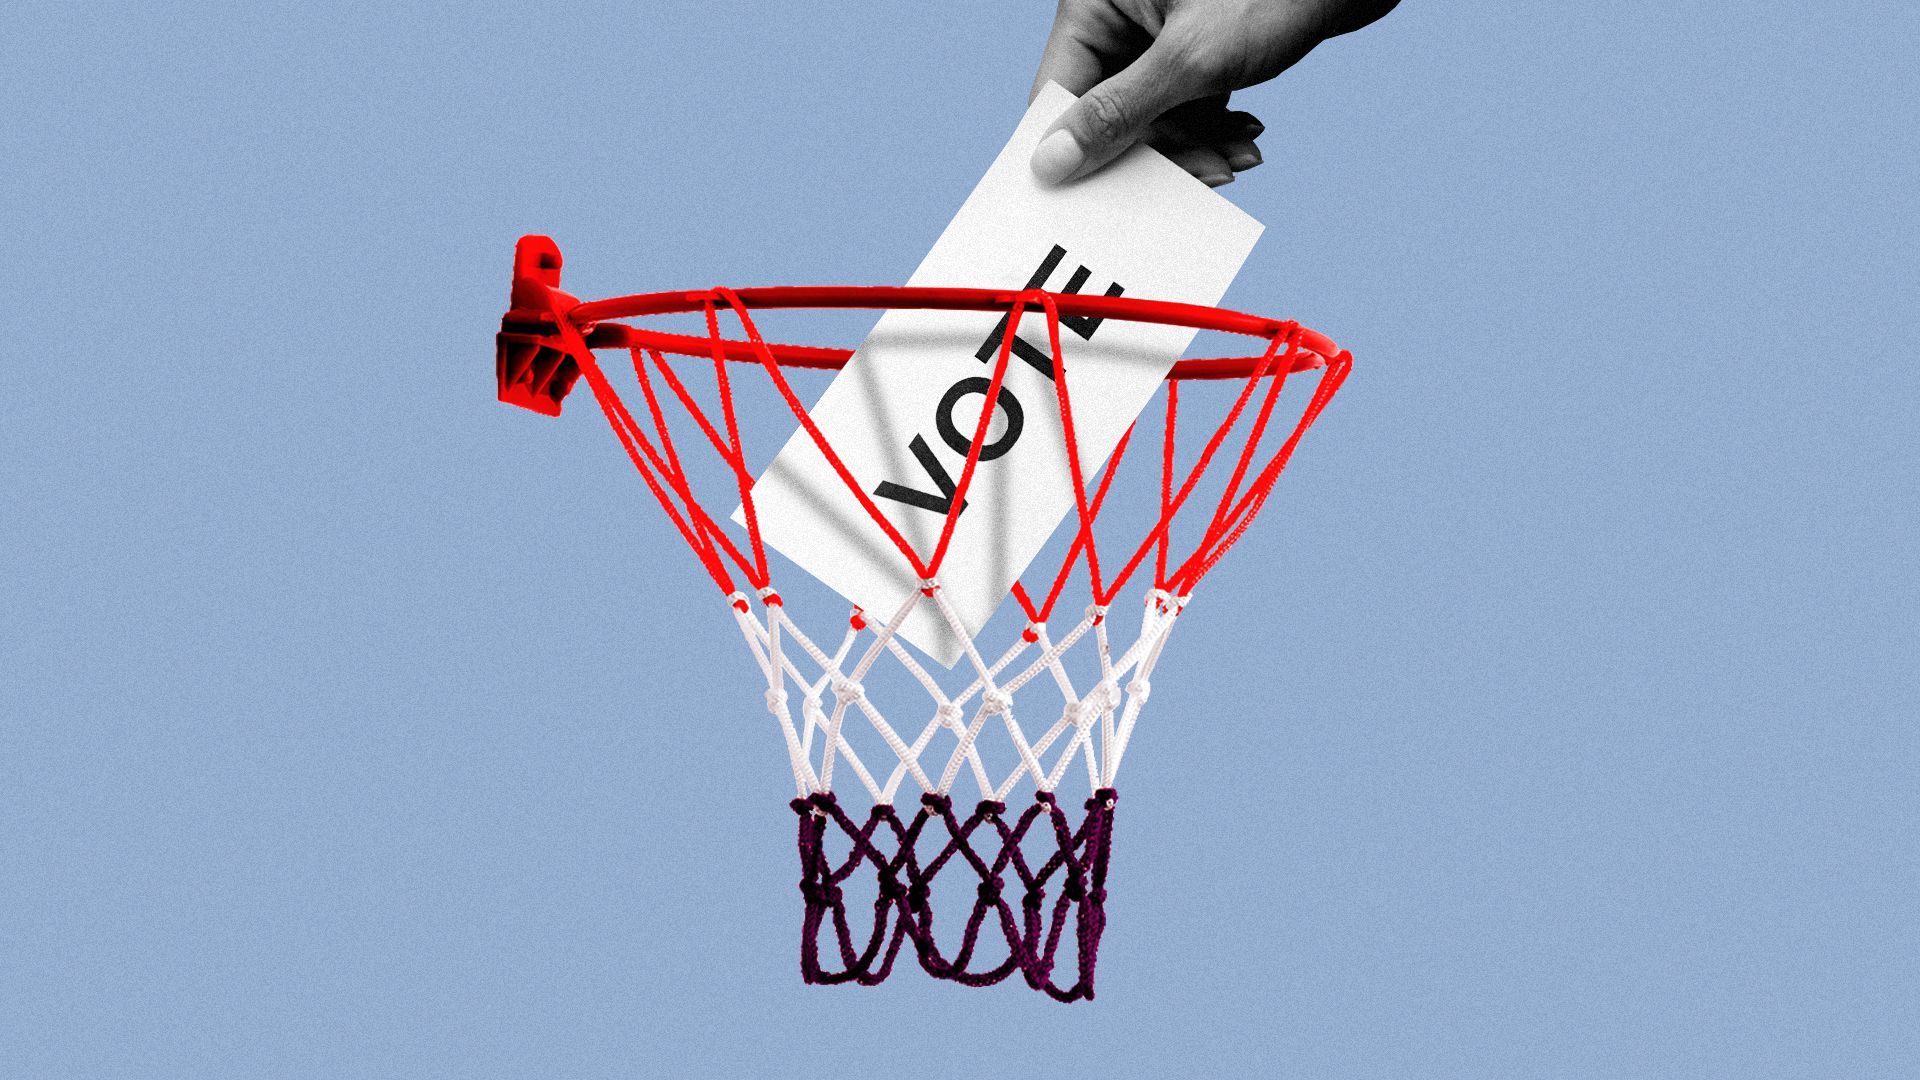 Illustration of a person dropping a voter ballot into a basketball hoop.